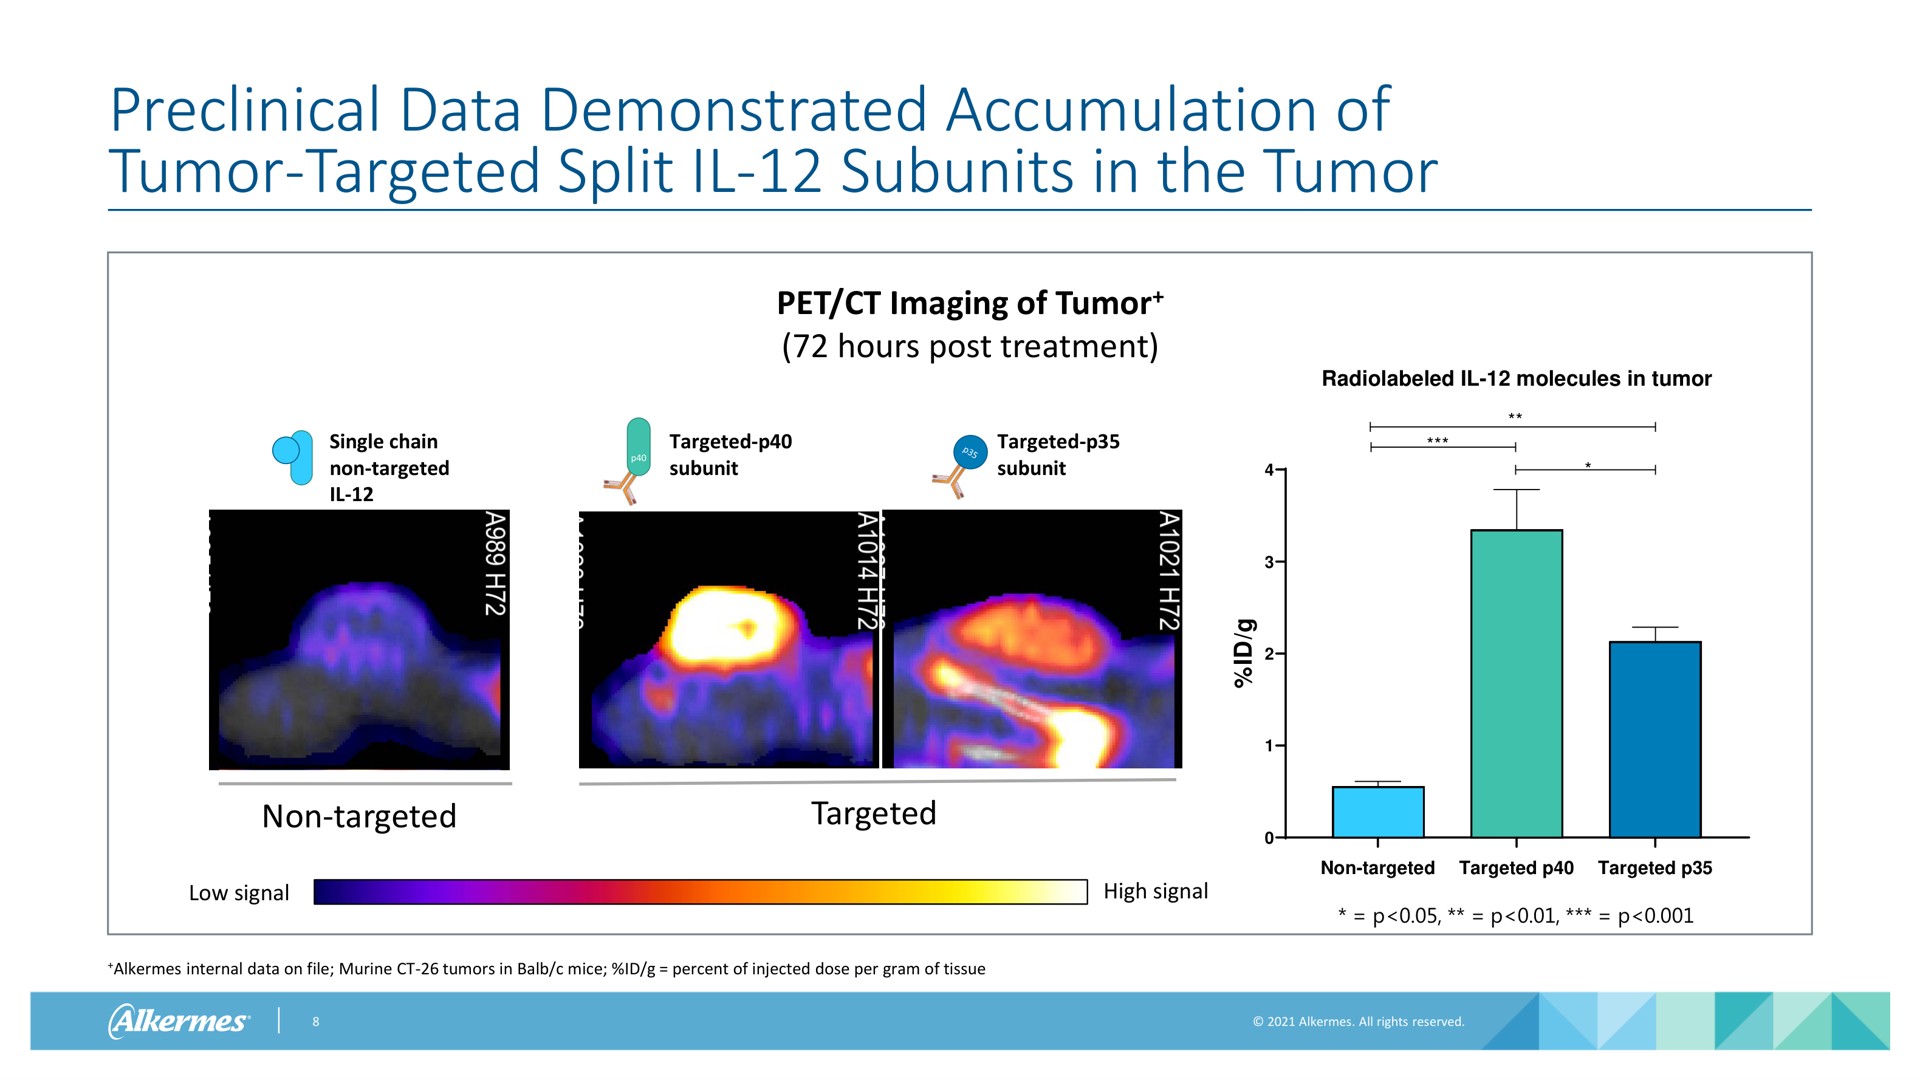 preclinical data demonstrated accumulation of tumor targeted split subunits in the tumor pet imaging of tumor hours post treatment single chain non targeted targeted subunit targeted subunit molecules in tumor high signal non targeted targeted targeted non targeted targeted low signal alkermes internal data on file murine tumors in mice percent of injected dose per gram of tissue | Alkermes